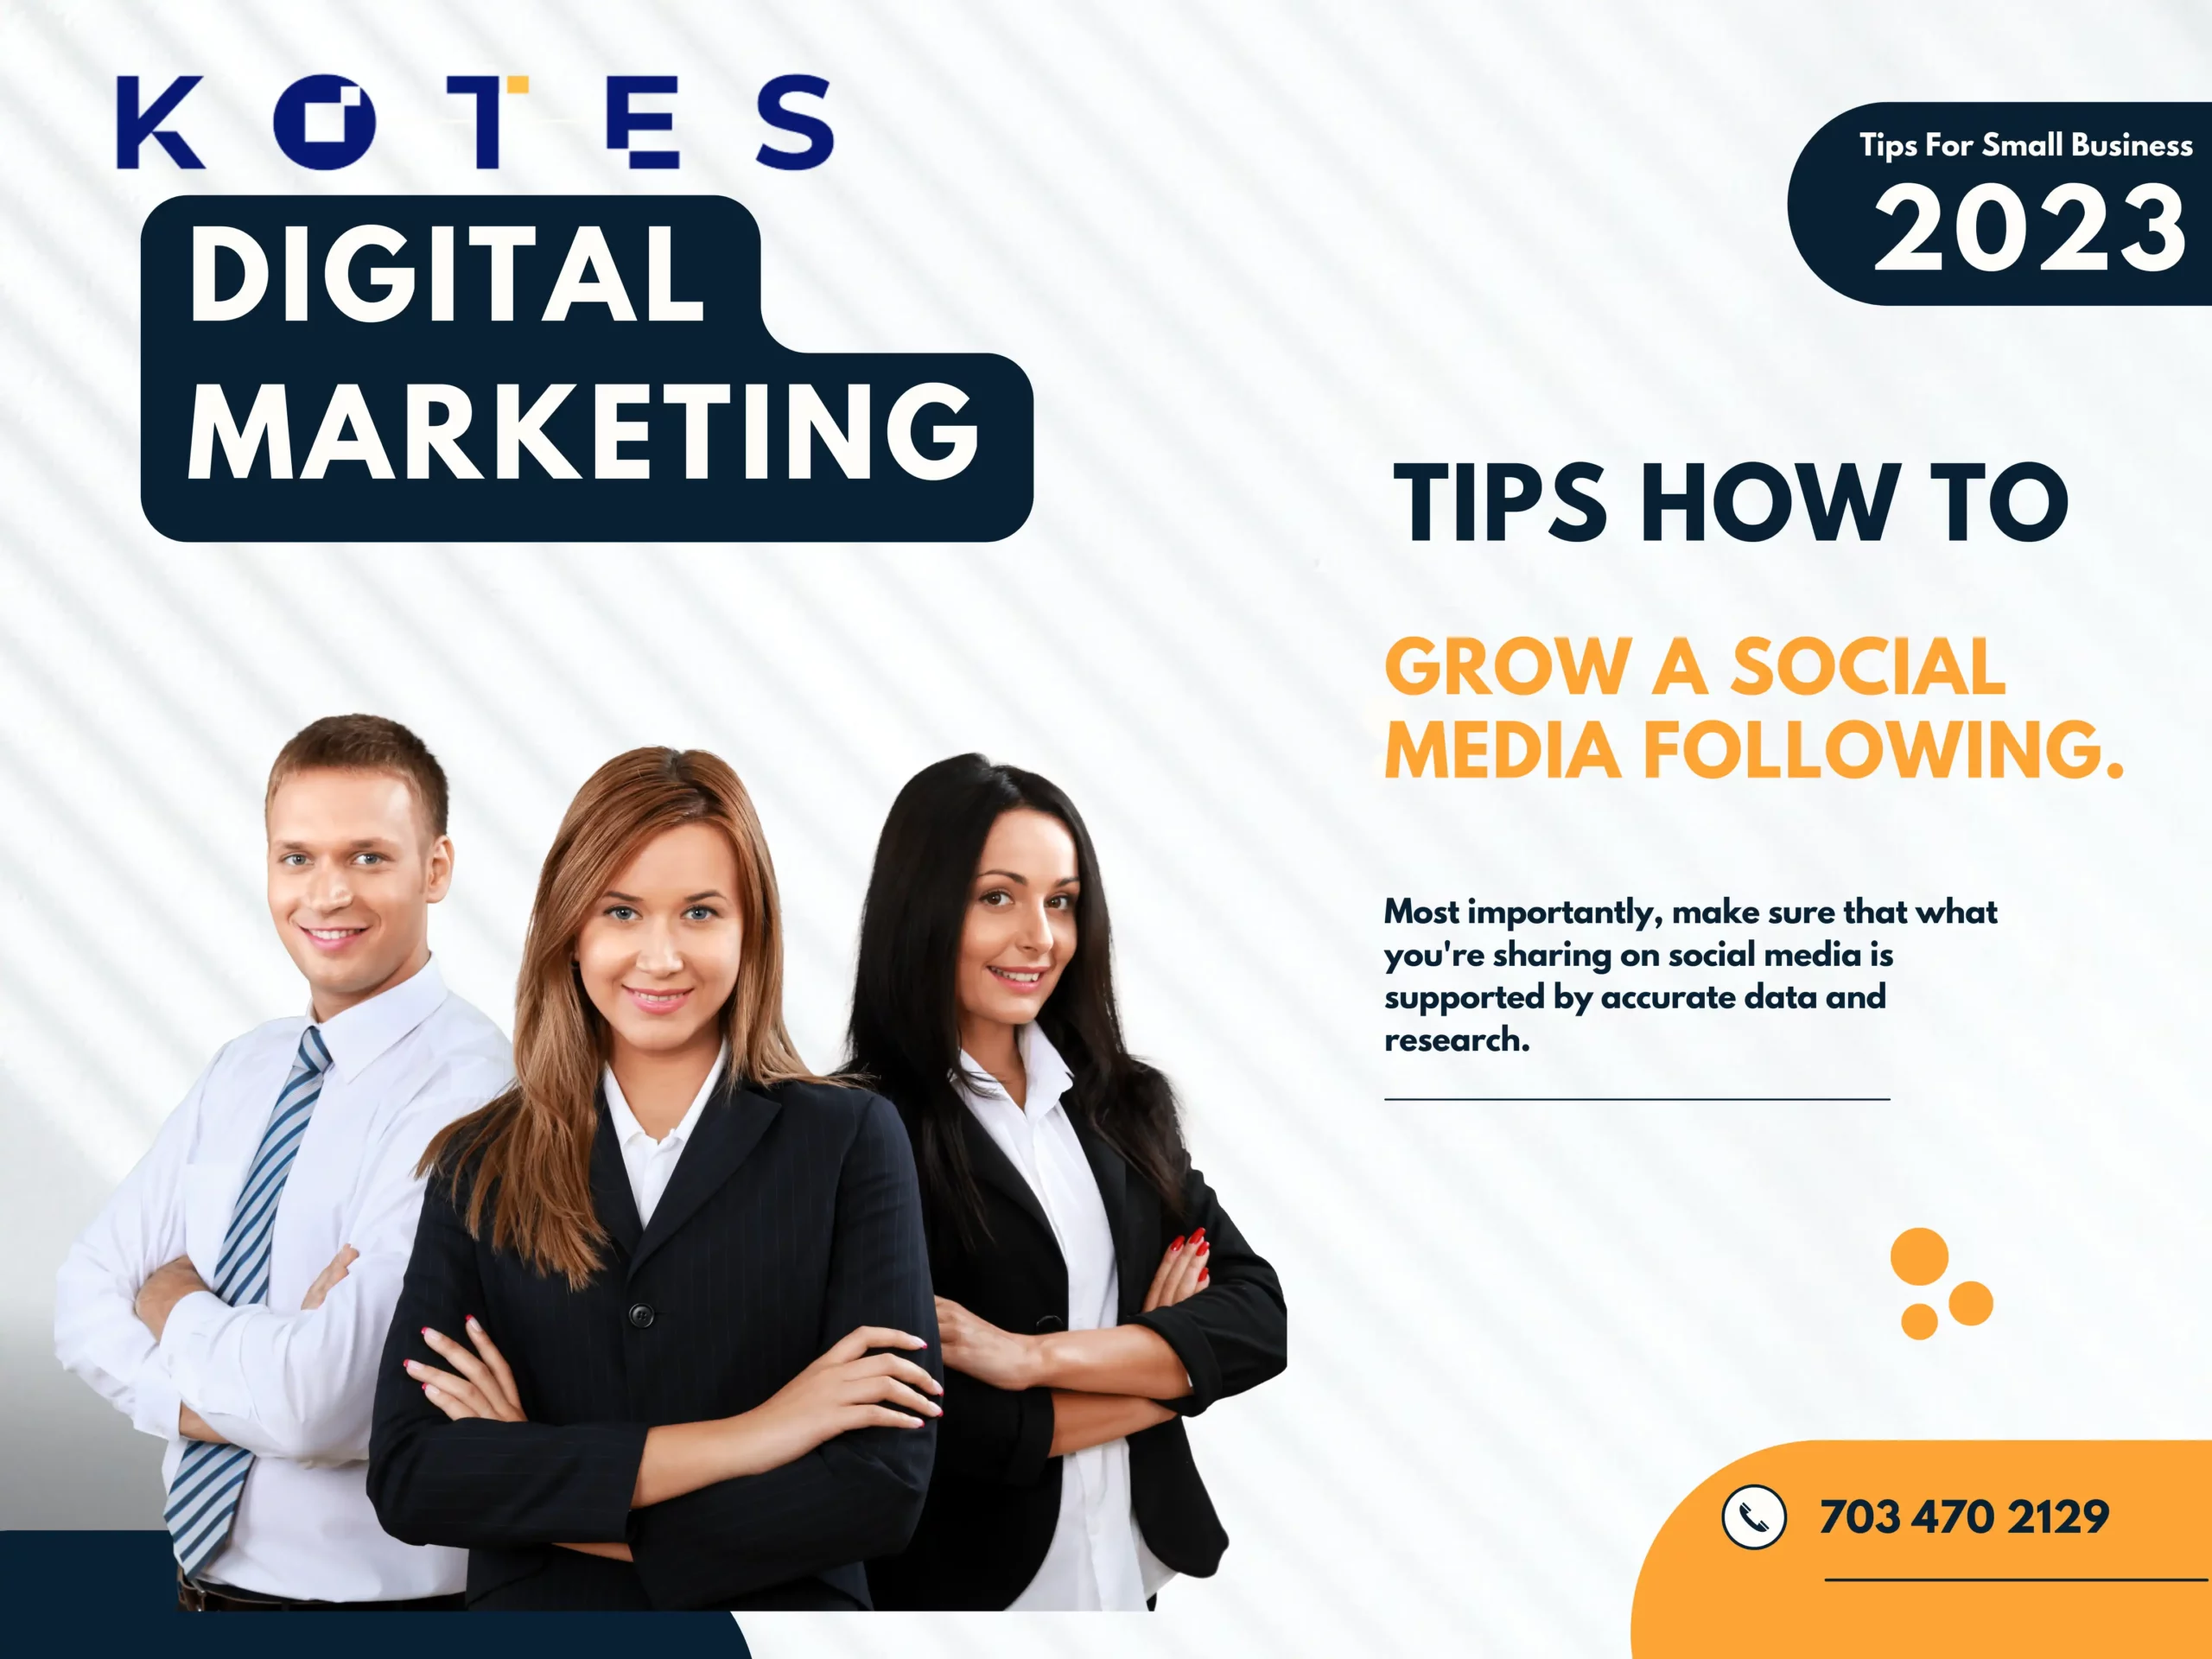 kotes digital tips for small businesses